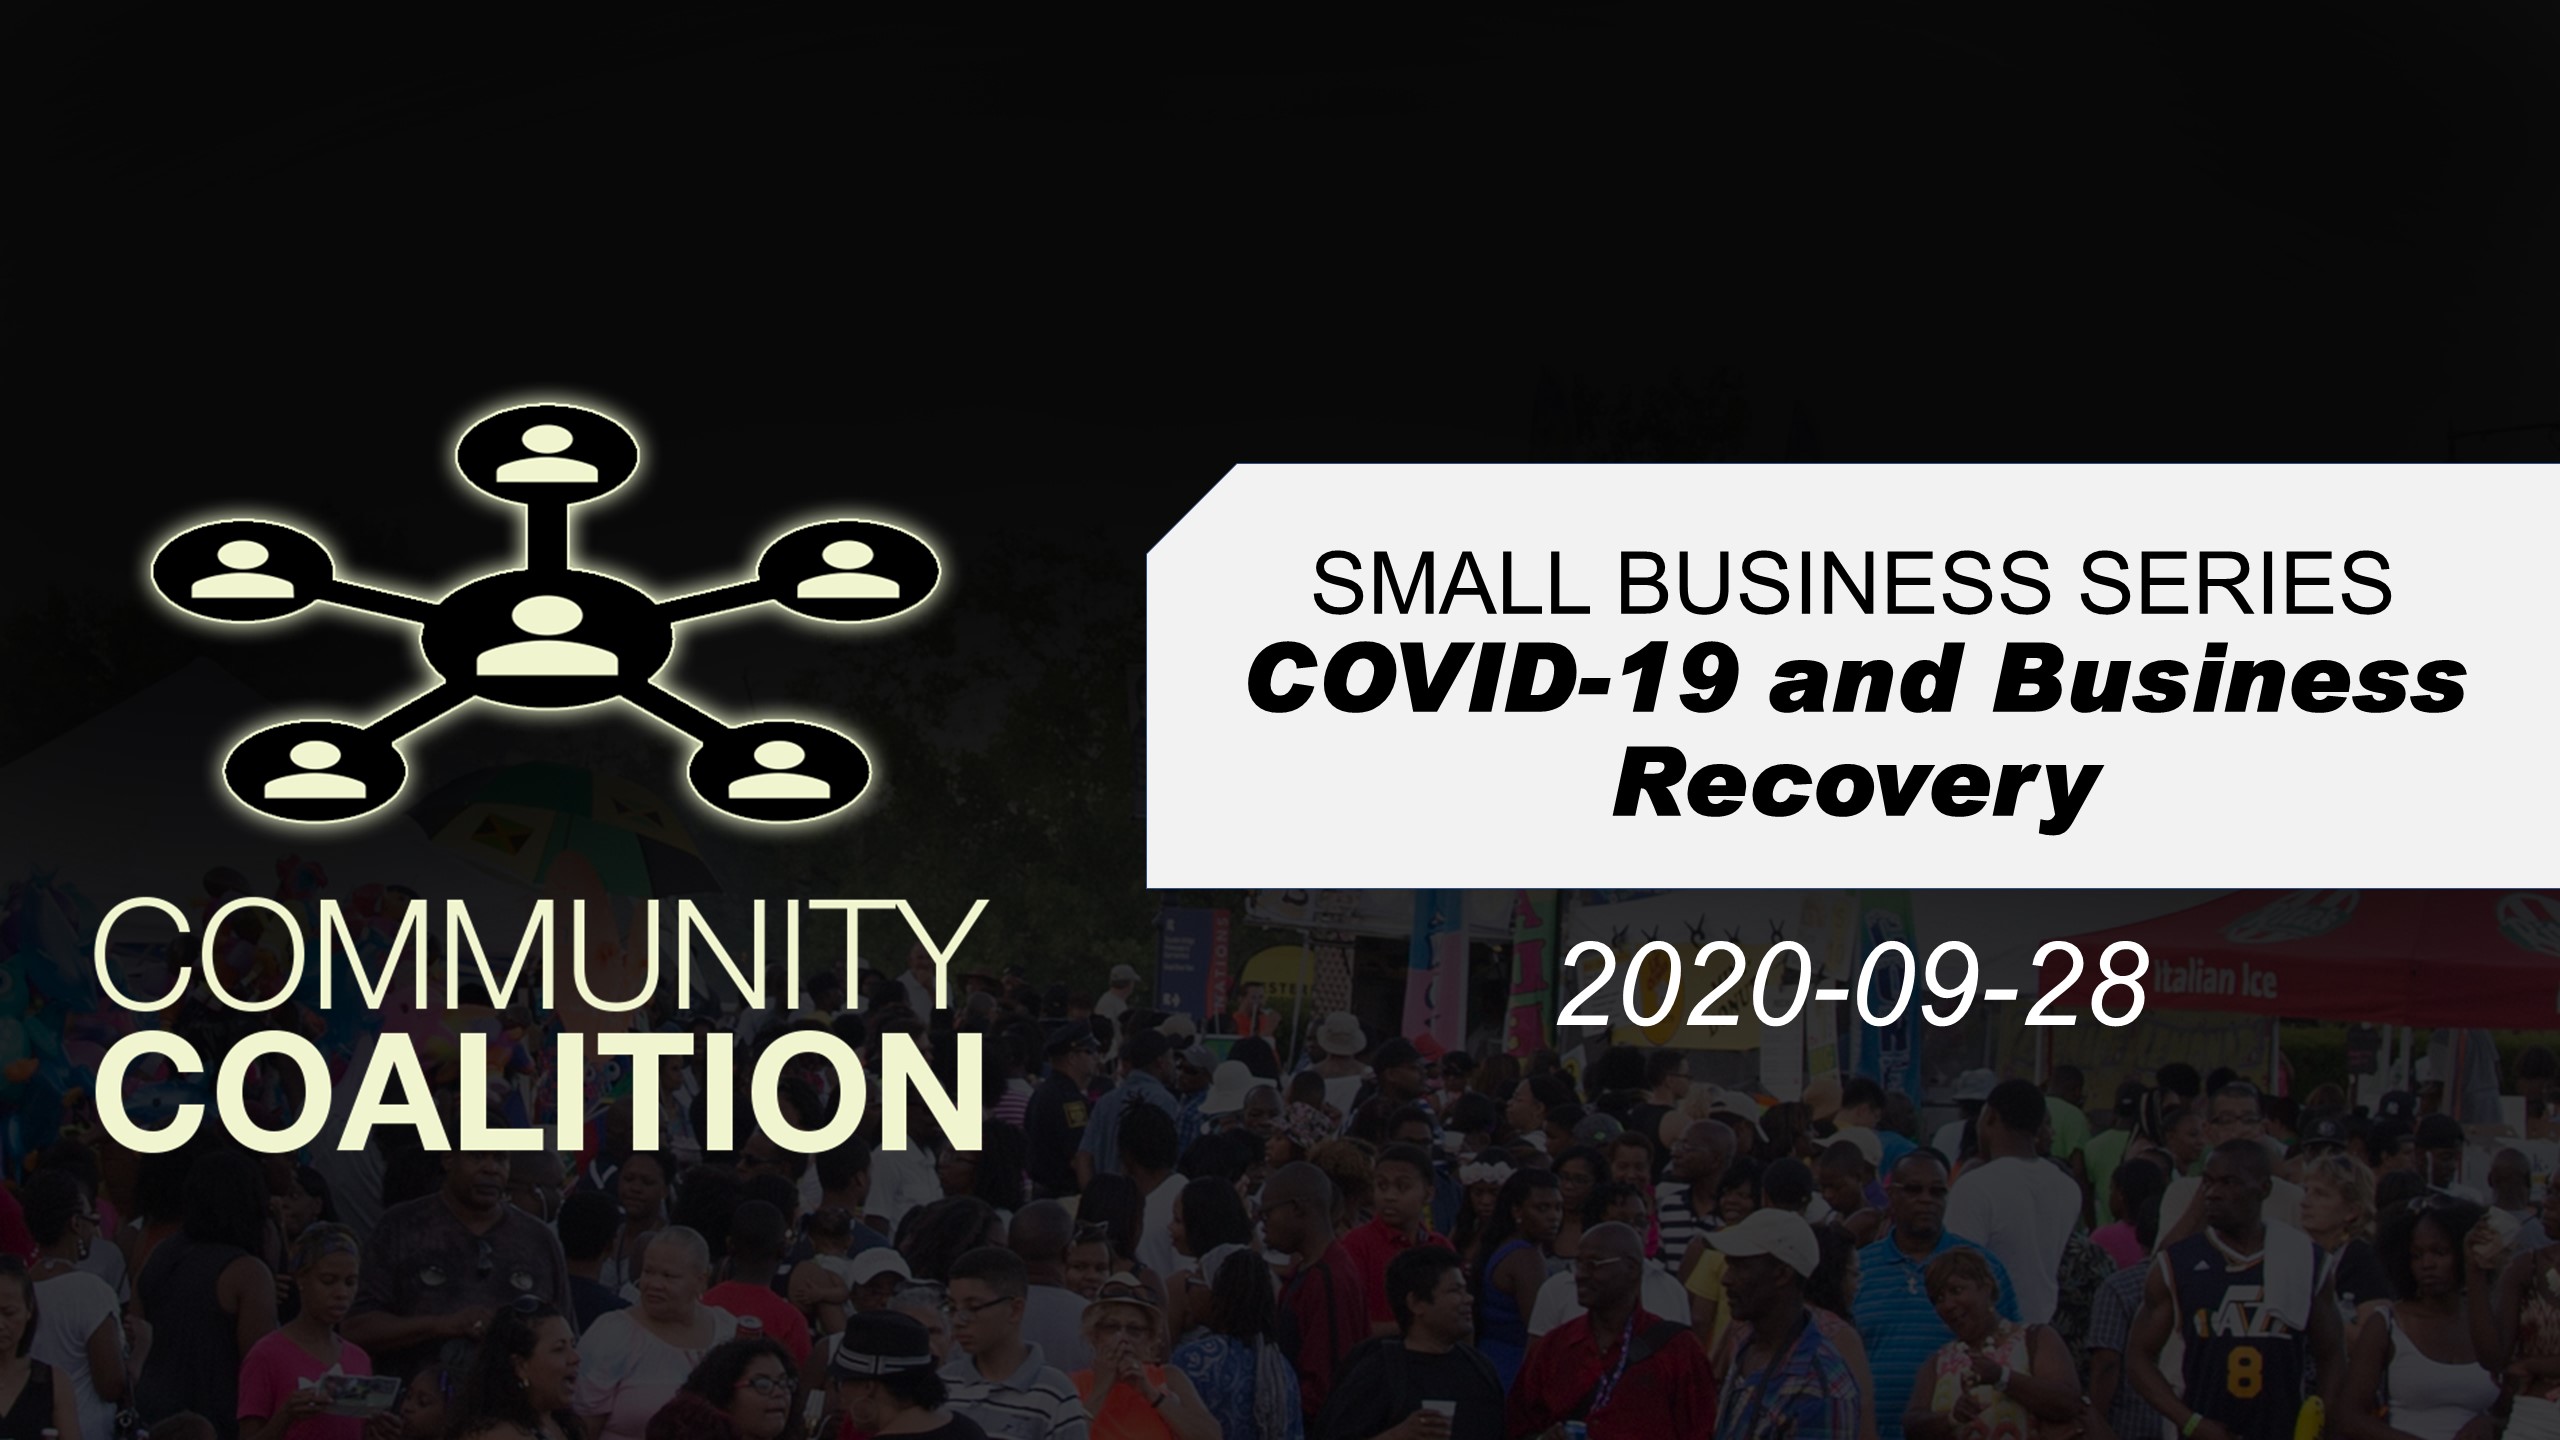 COVID-19 Impact & Business Recovery – Small Business Virtual Video Series